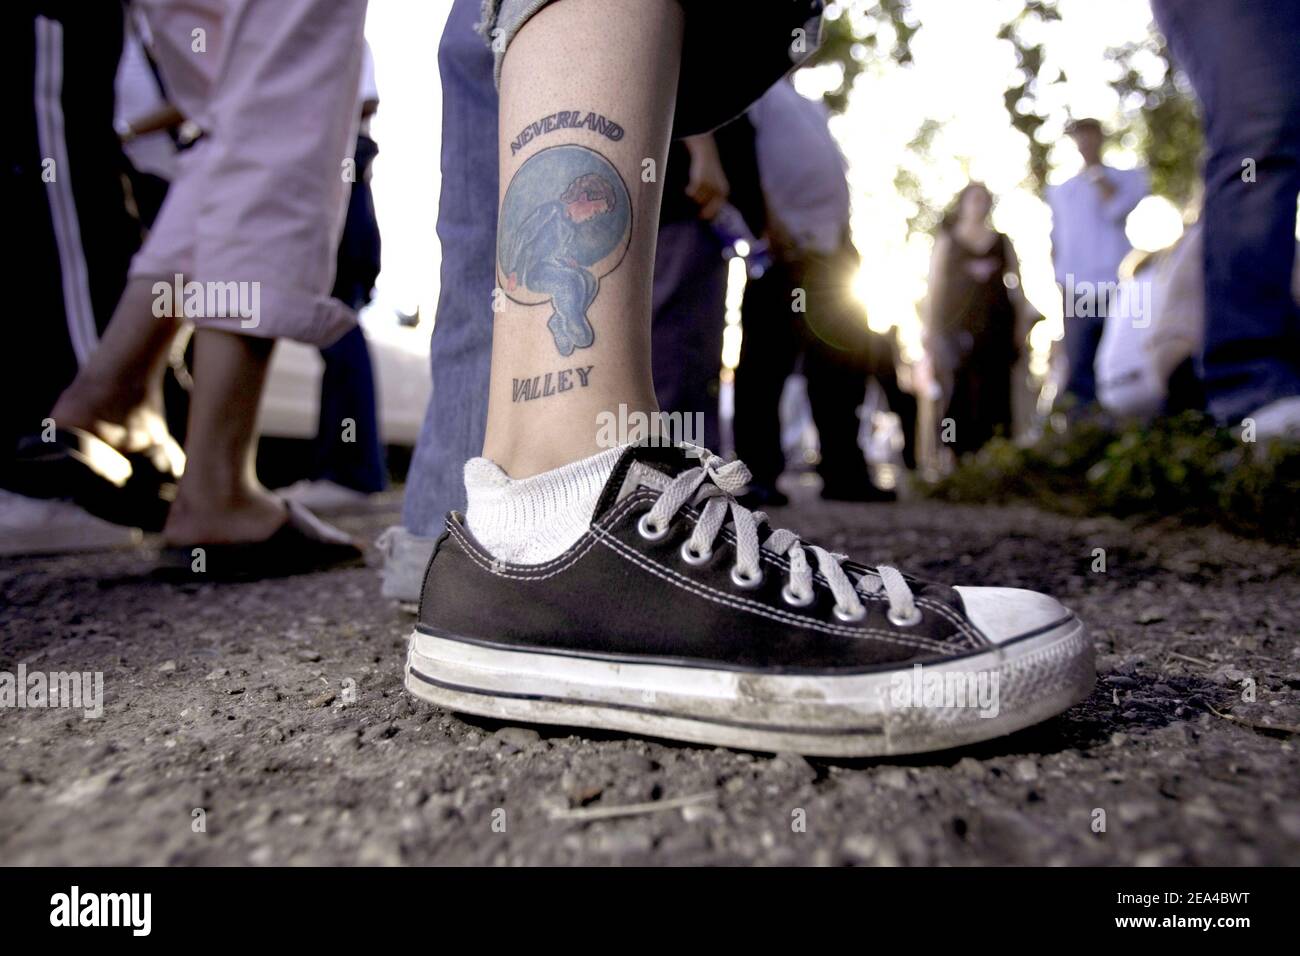 Katie Burrell (22) of Arizona shows off one of her two Michael Jackson  tattoos outside the Neverland Ranch in Santa Ynez, CA, USA, after the final  not guilty verdict. Photo by Jeff